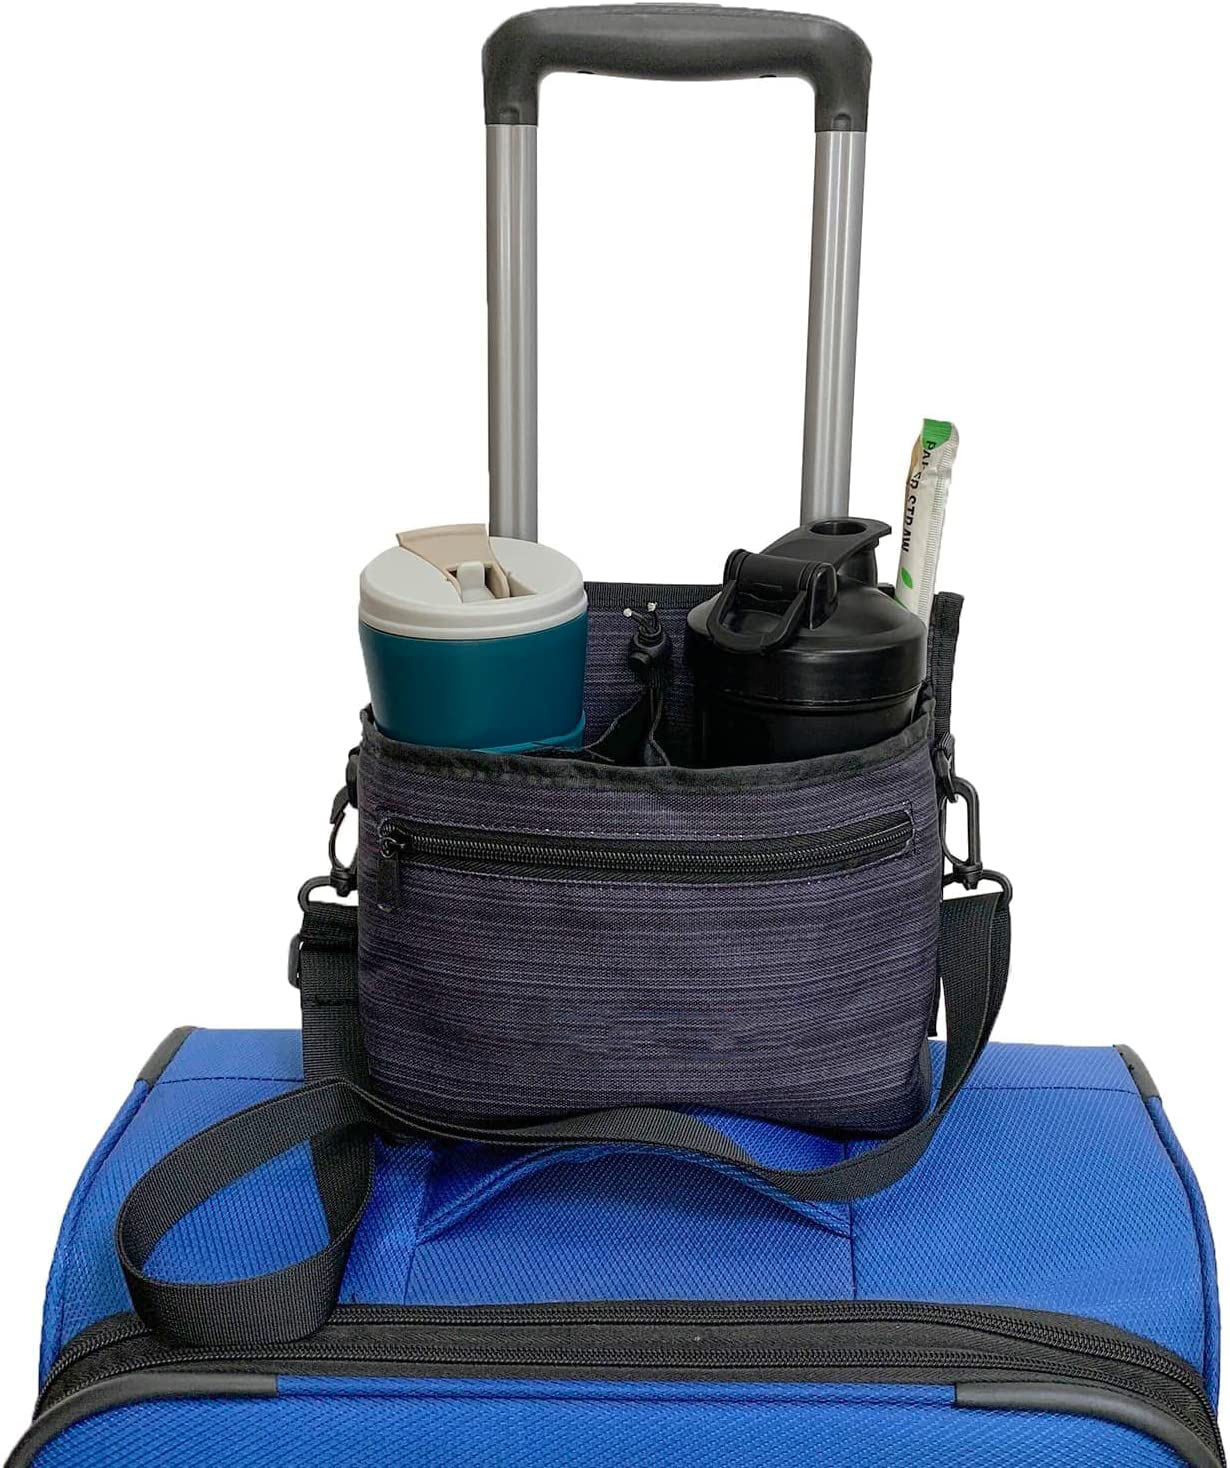 New Thermal Luggage Travel Cup Holder Bag With Shoulder Strap Insulated Travel Drink Caddy Free Your Hand Oem Acceptable